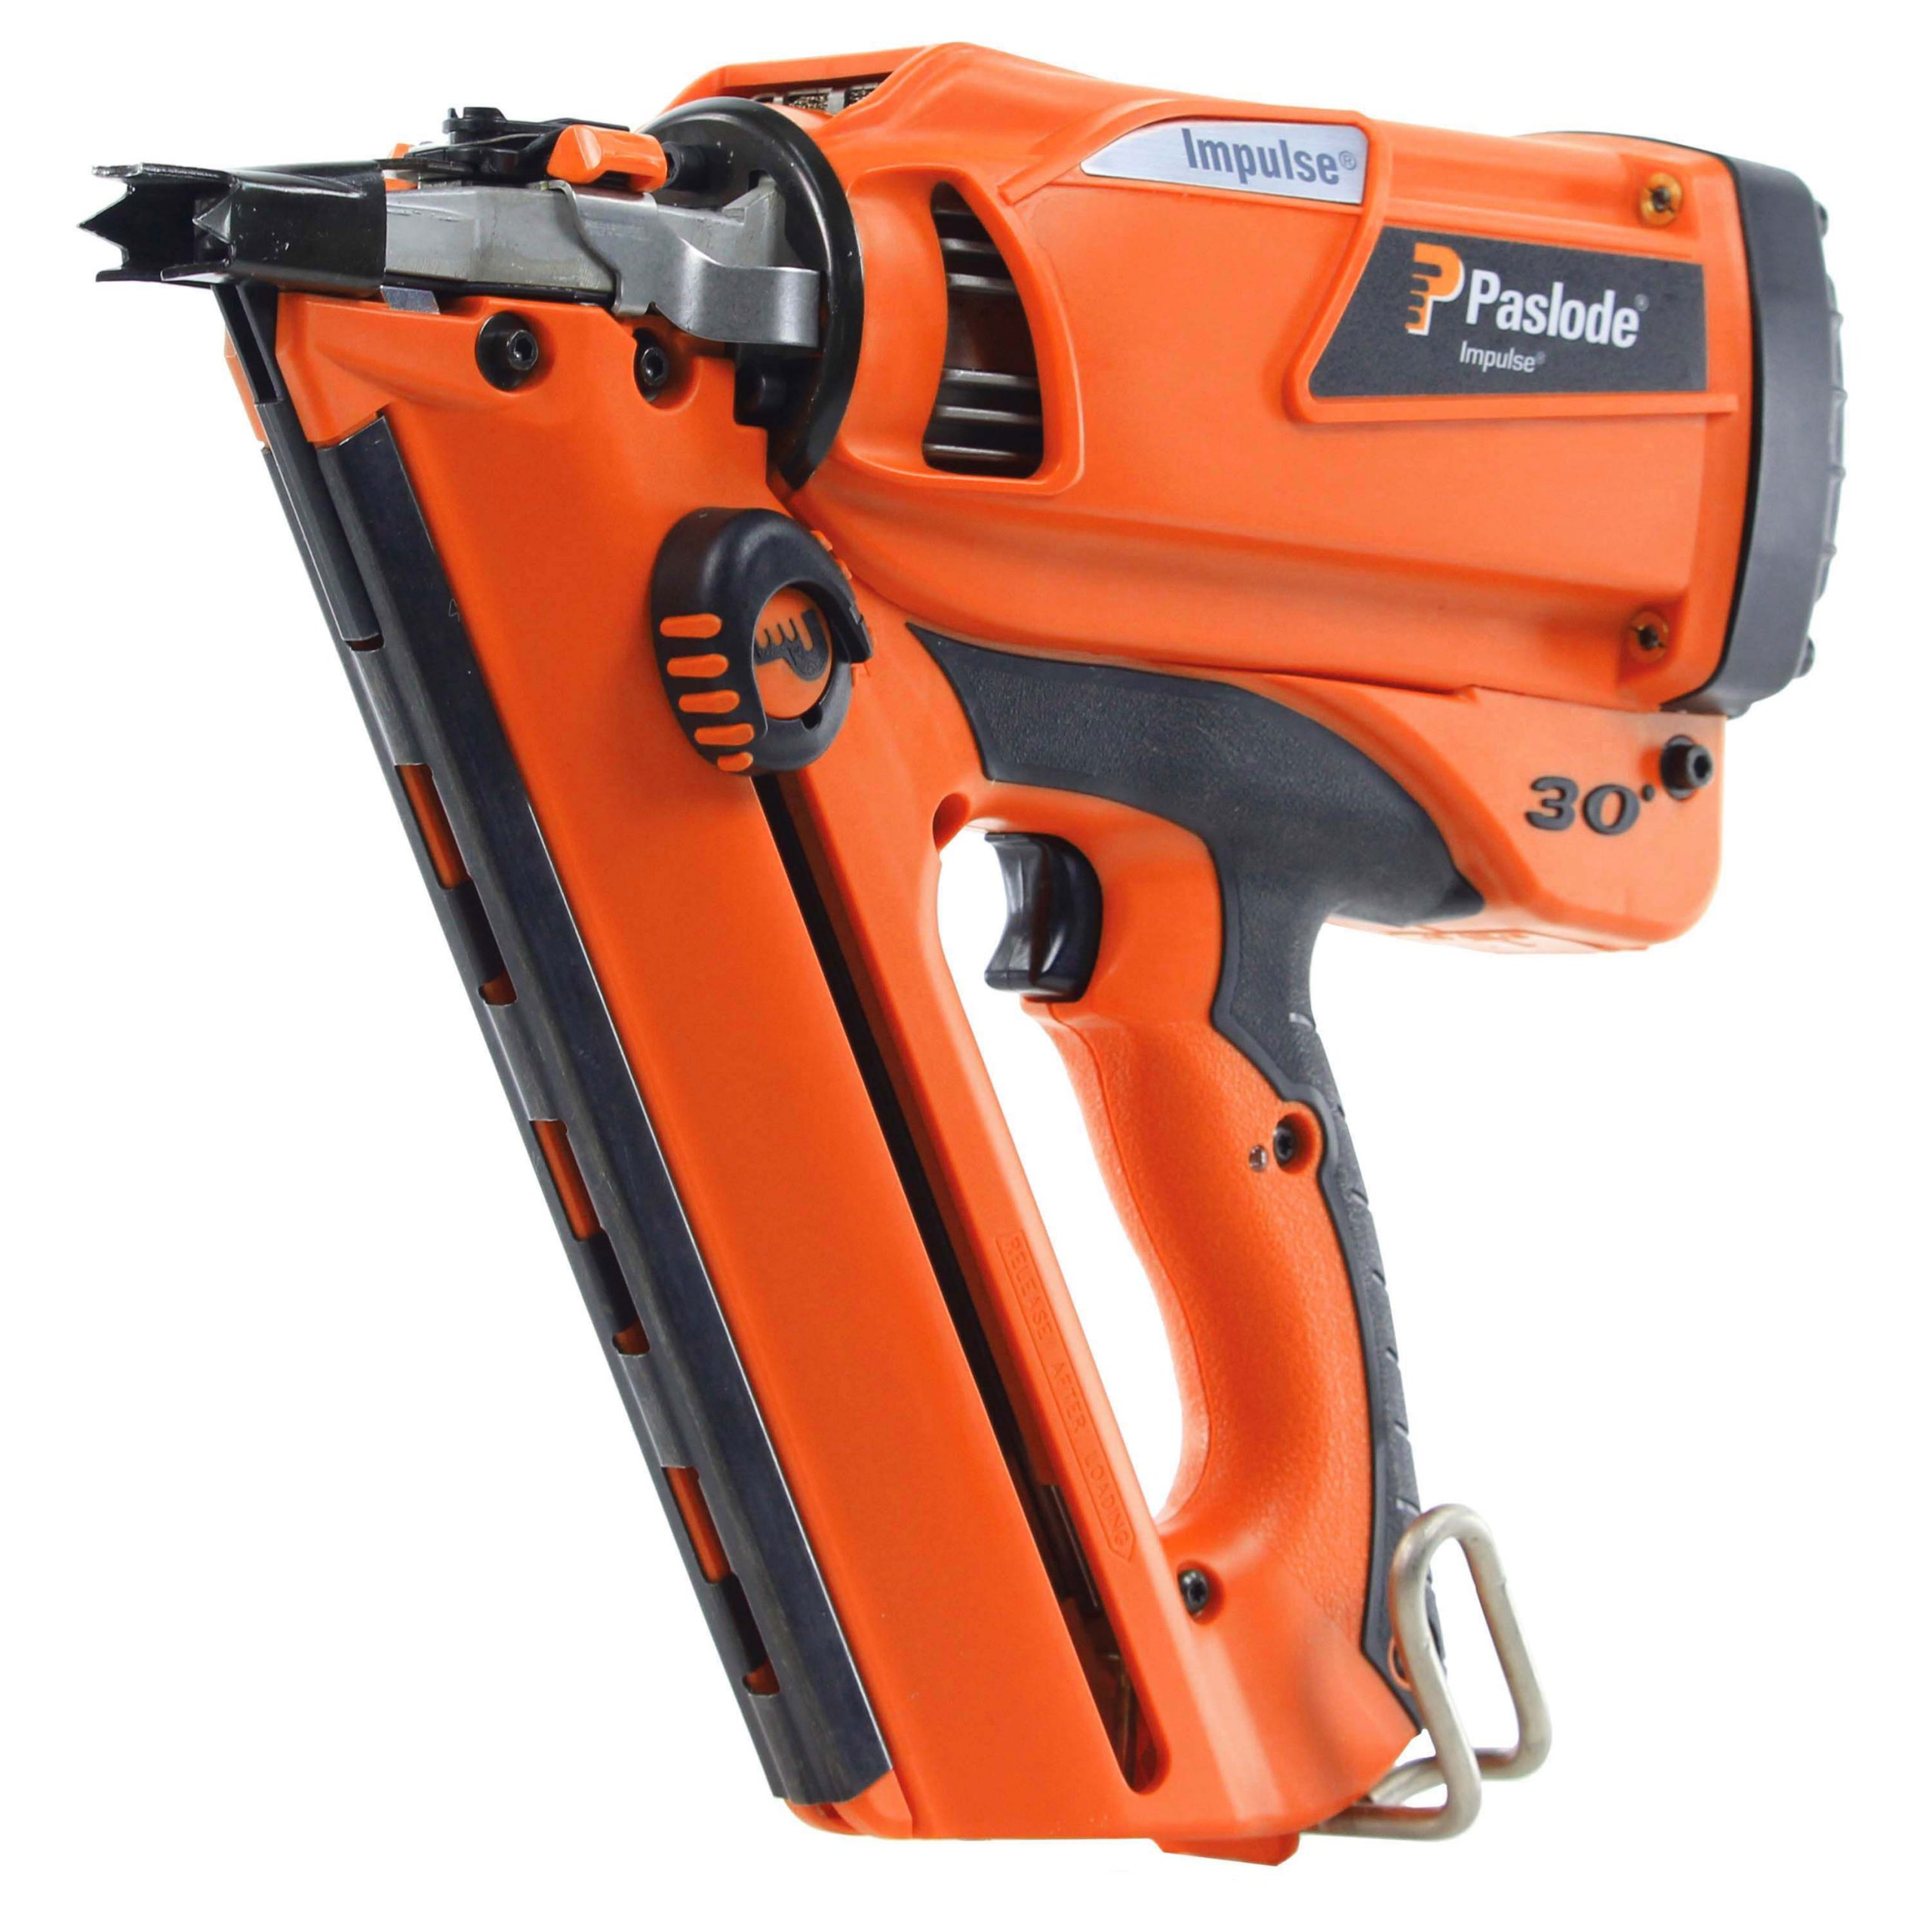 Paslode - Cordless Finish Nailer, 916200, 16 Gauge Angled, Battery and Fuel  Cell Powered, No Compressor Needed - Amazon.com